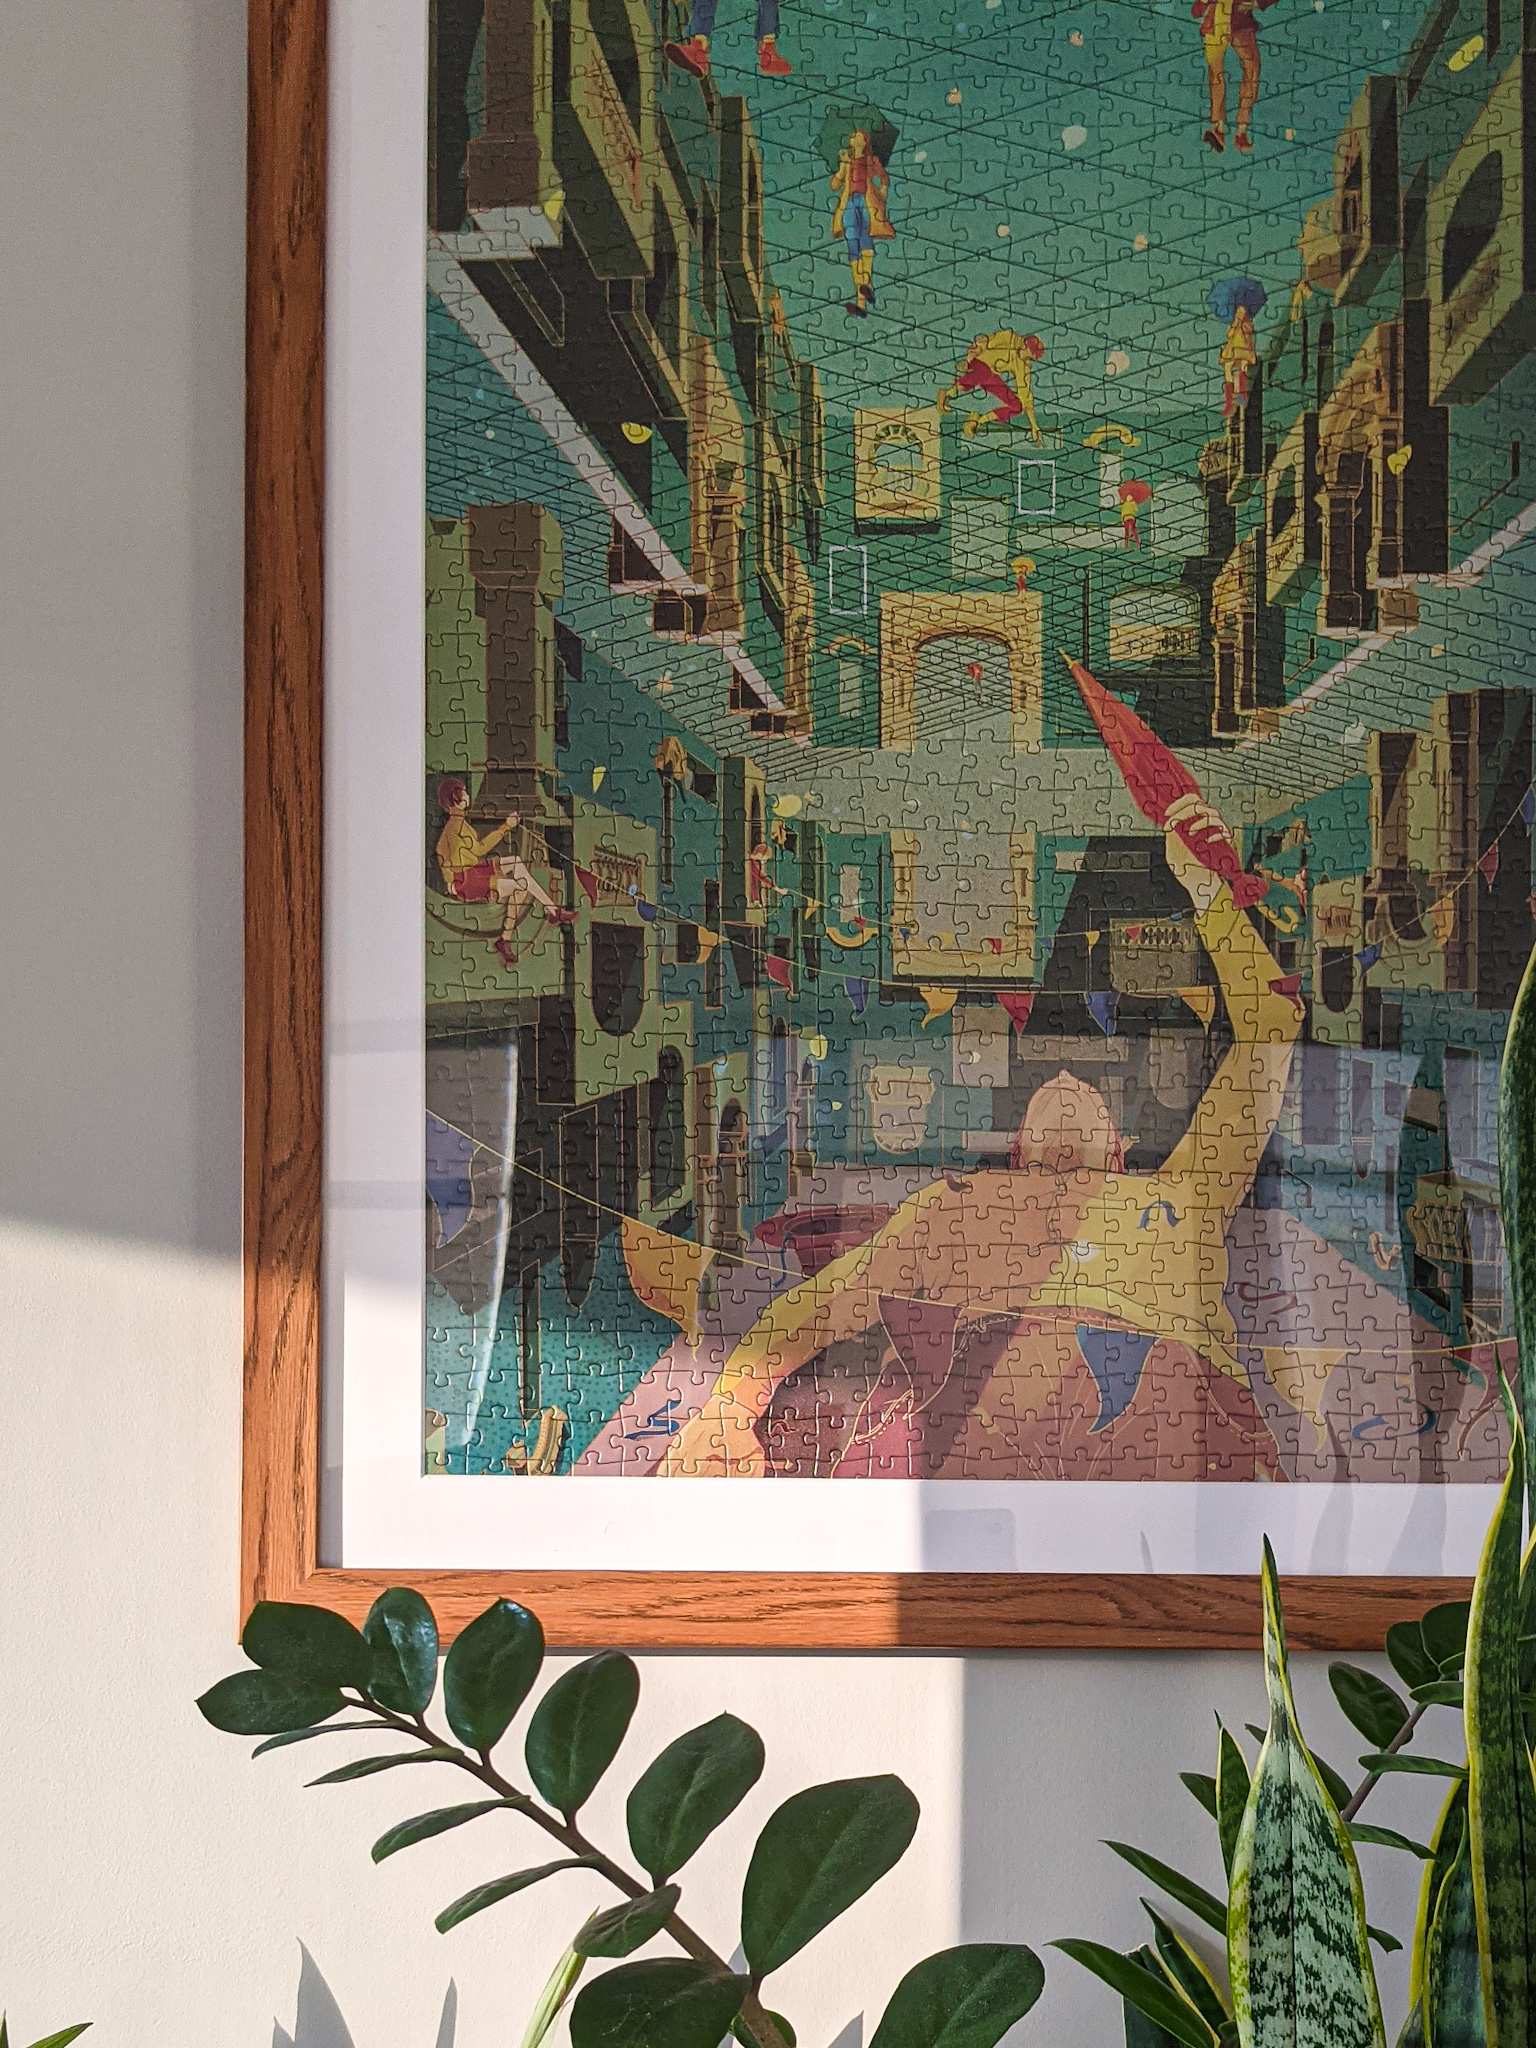 A completed puzzle in a brown frame and hung up on the wall. Light hits the bottom of the puzzle and plants take up the space underneath the puzzle. The image on the puzzle is a transcendent digital painting that looks like a structural study with characters throughout. The characters are on different levels of the scene and are holding closed and open umbrellas. 